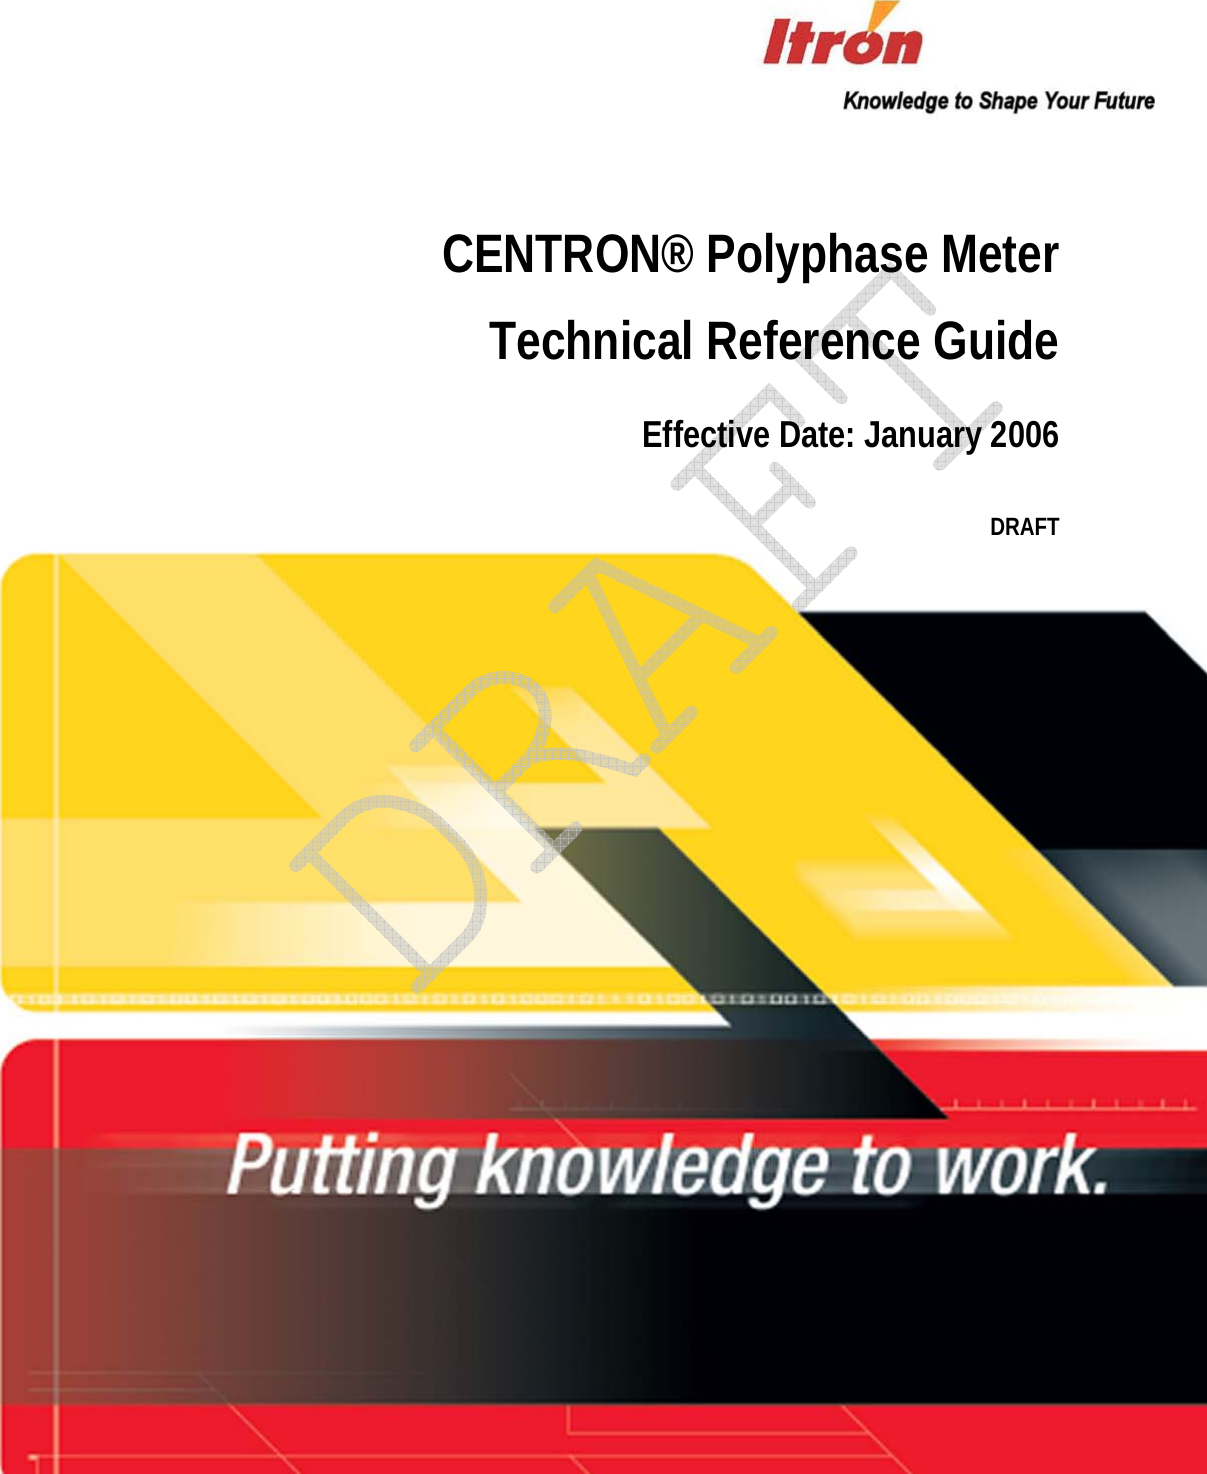  CENTRON® Polyphase Meter Technical Reference Guide Effective Date: January 2006 DRAFT   